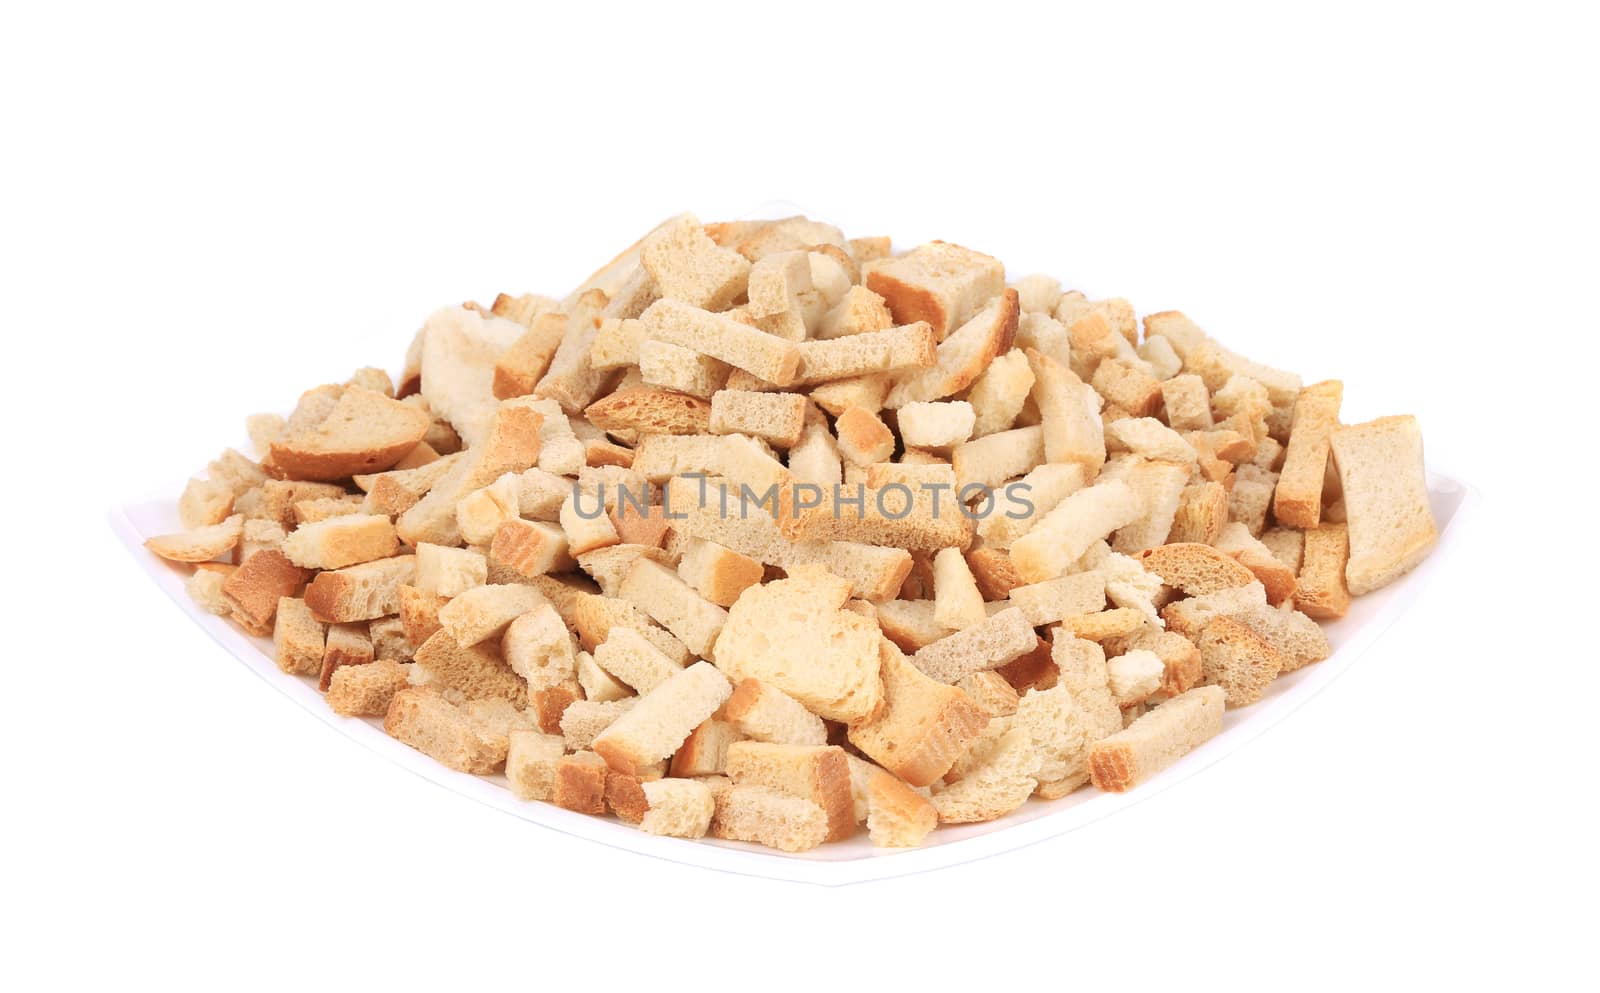 Croutons in a porcelain plate. Isolated on a white background.